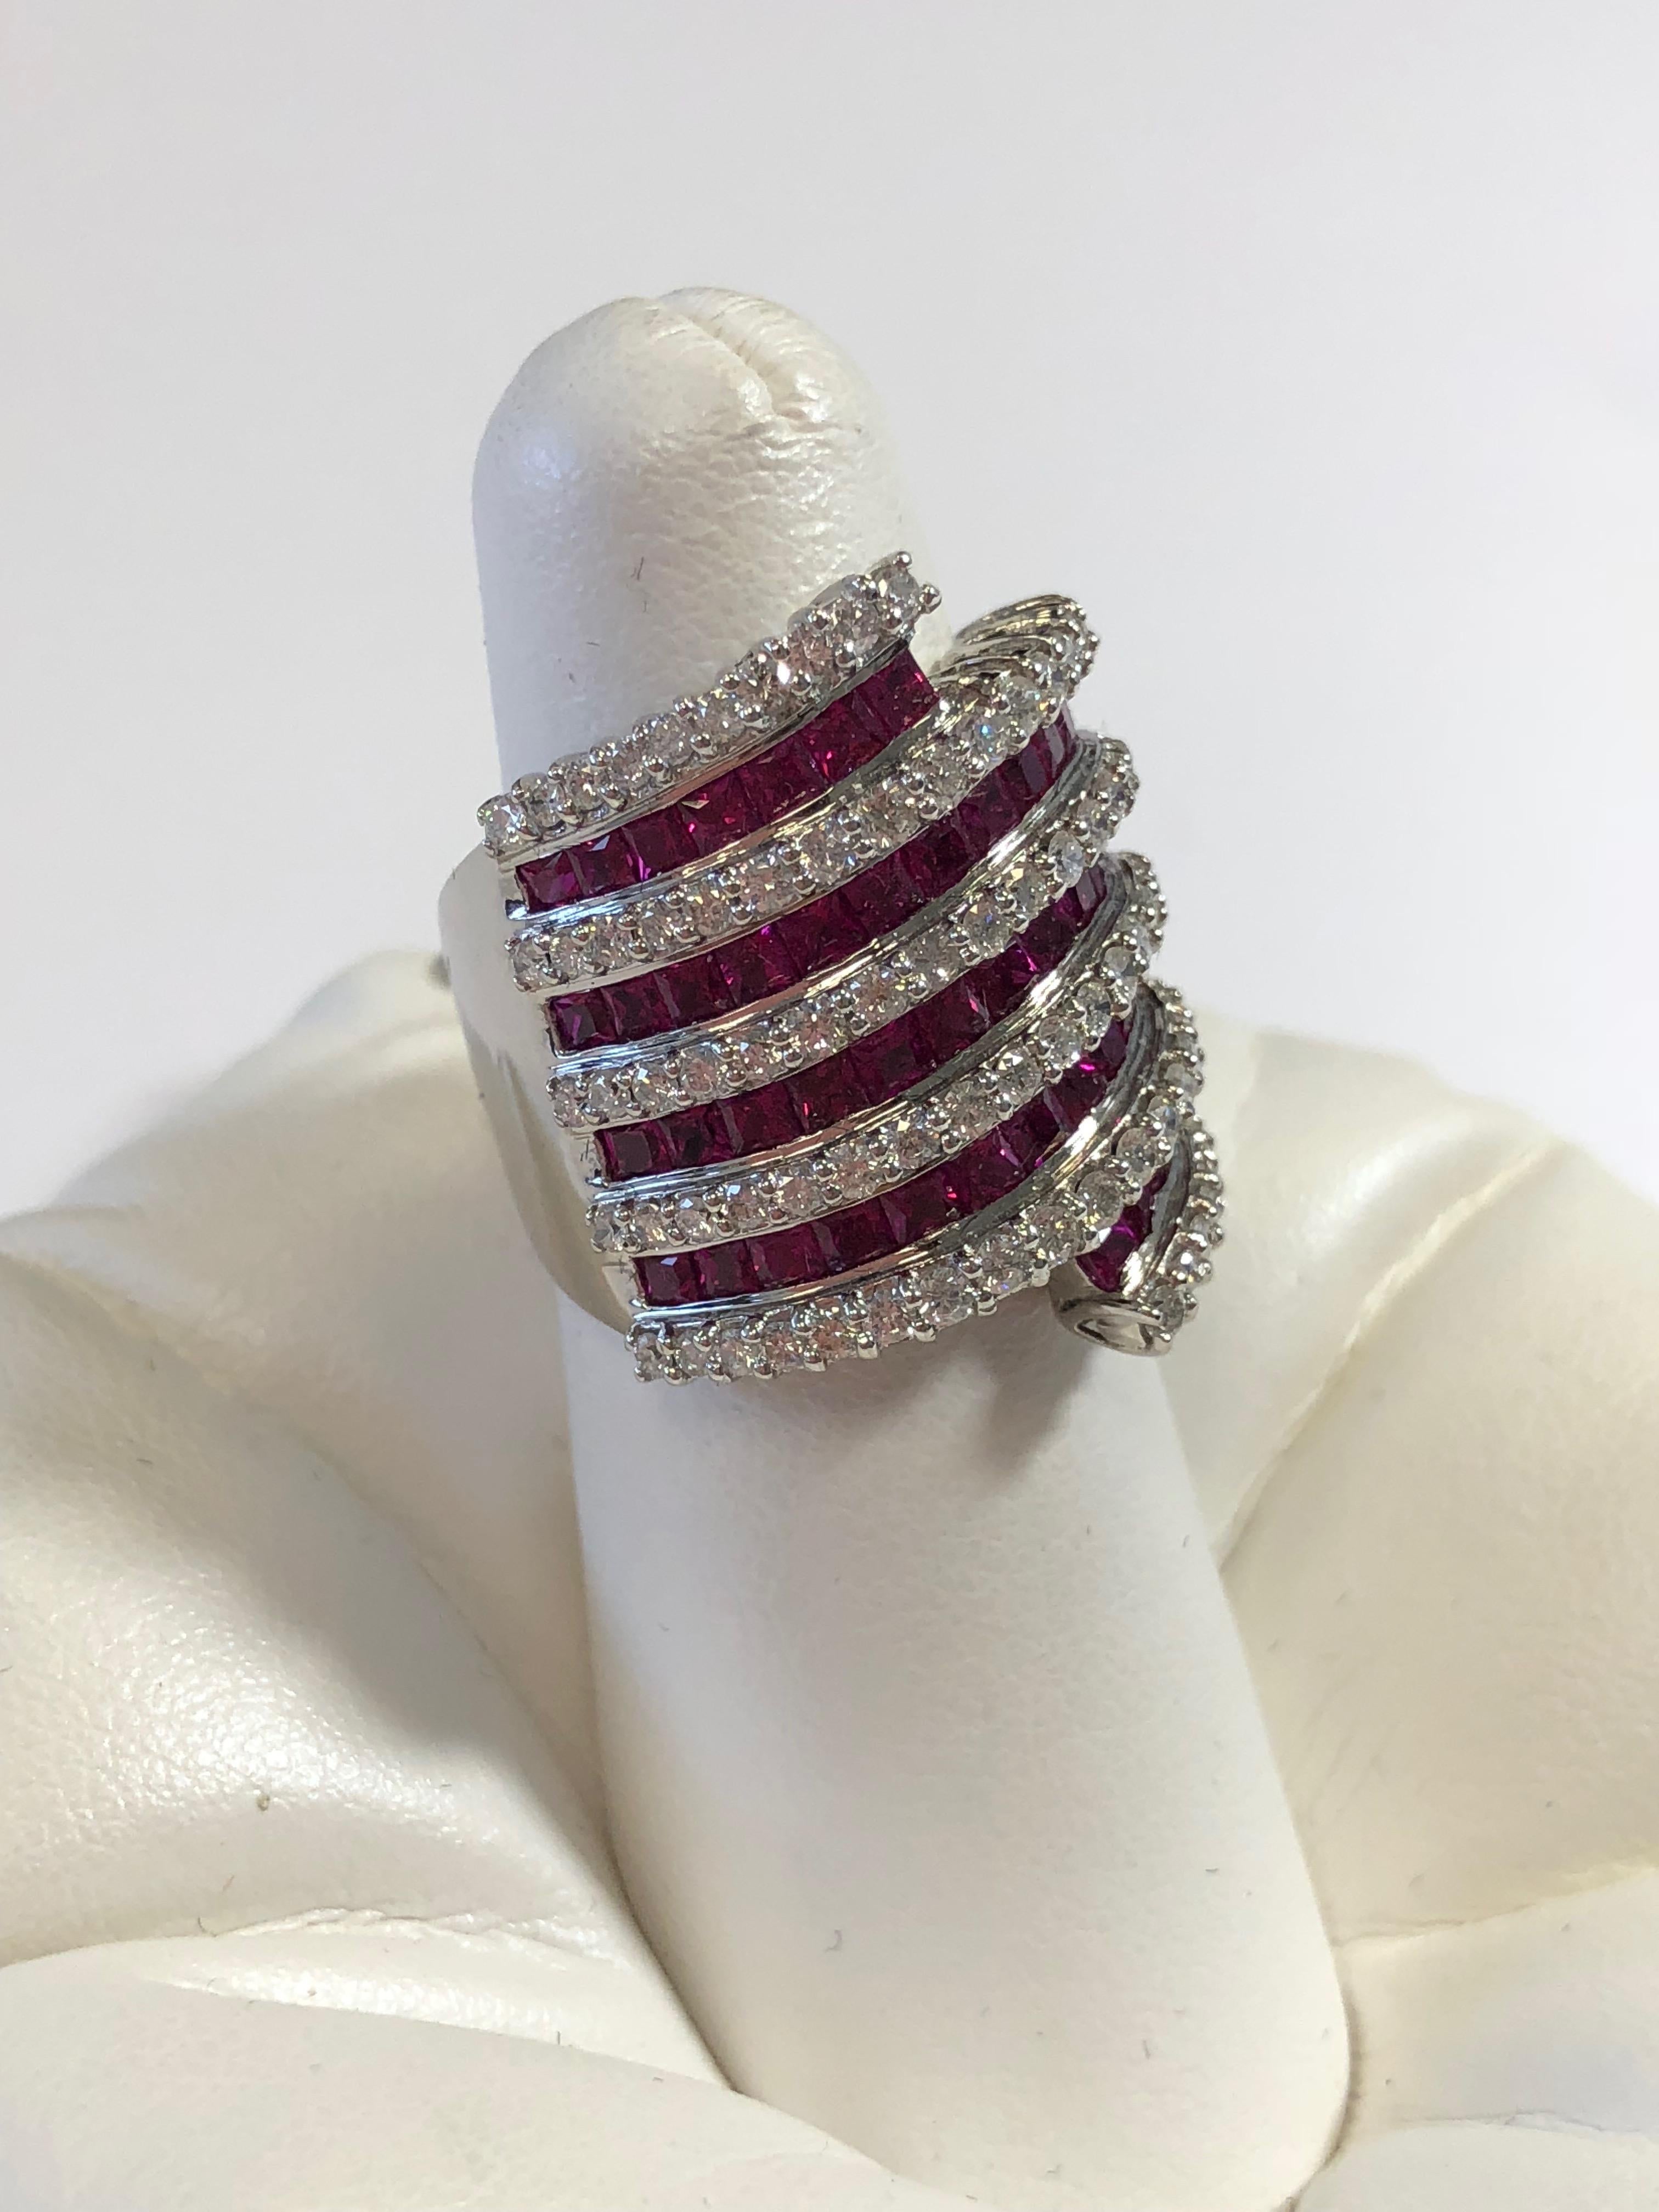 Stunning deep red ruby squares weighting 4 carats with 1.50 carats of good quality white diamonds in a 18k white gold size 6.5 mounting.  With alternating lines of ruby and diamonds, this ring has a beautiful contrast design.  The deep red hue of